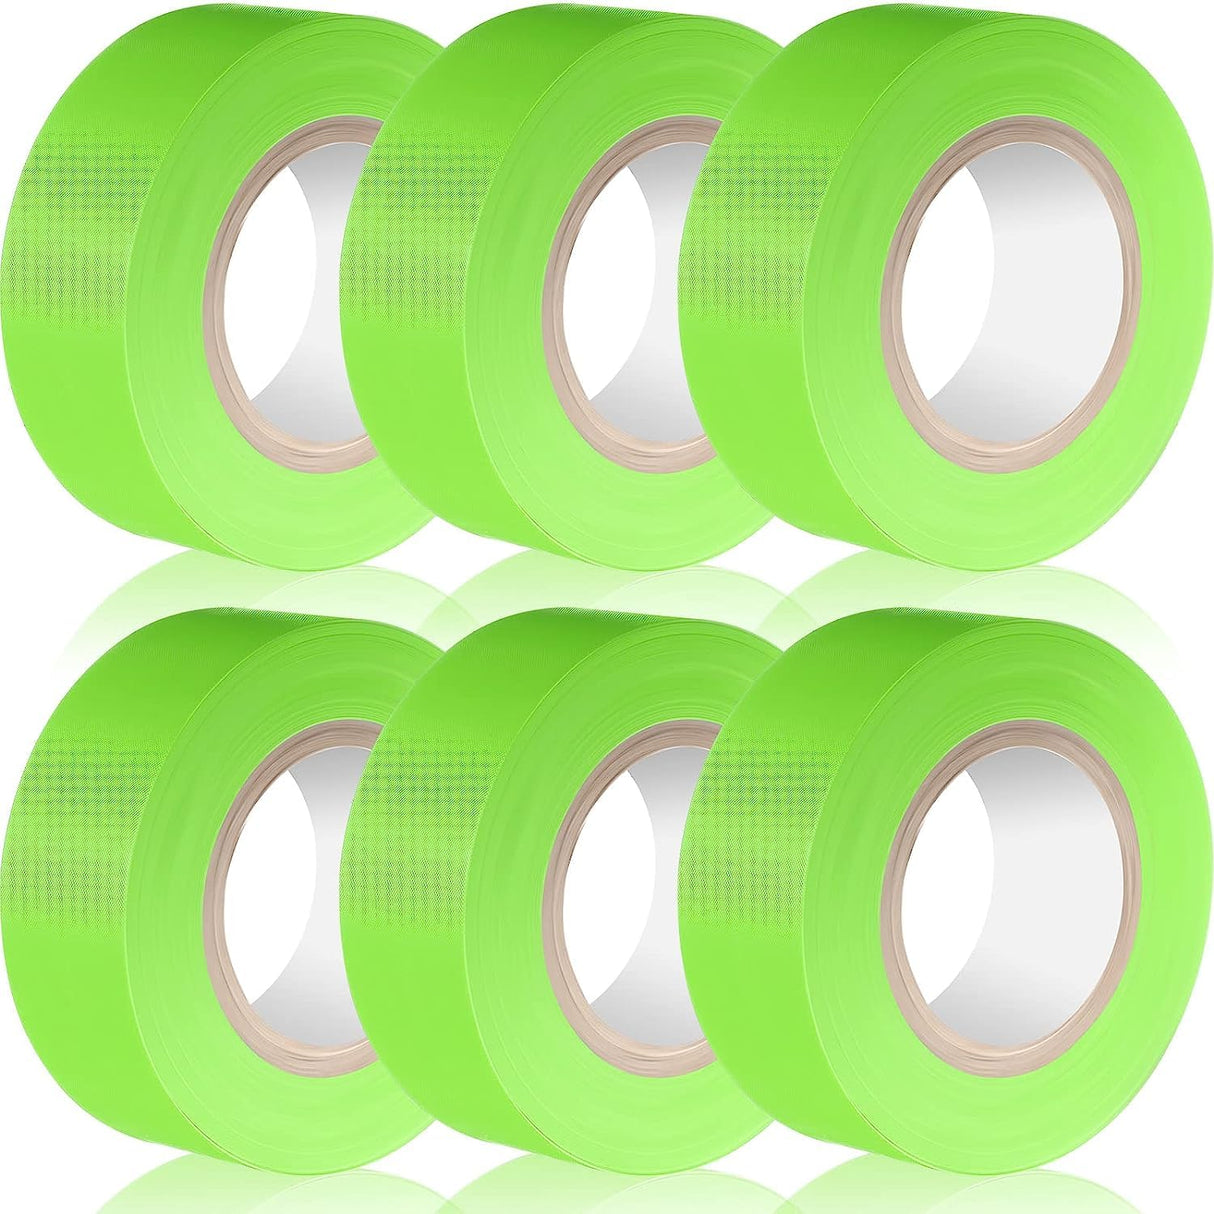 SINGHAL Flagging Tape Lime 1 Inch width 150 feet Length Pack of 6, for marking and flagging various areas | Highly Visible